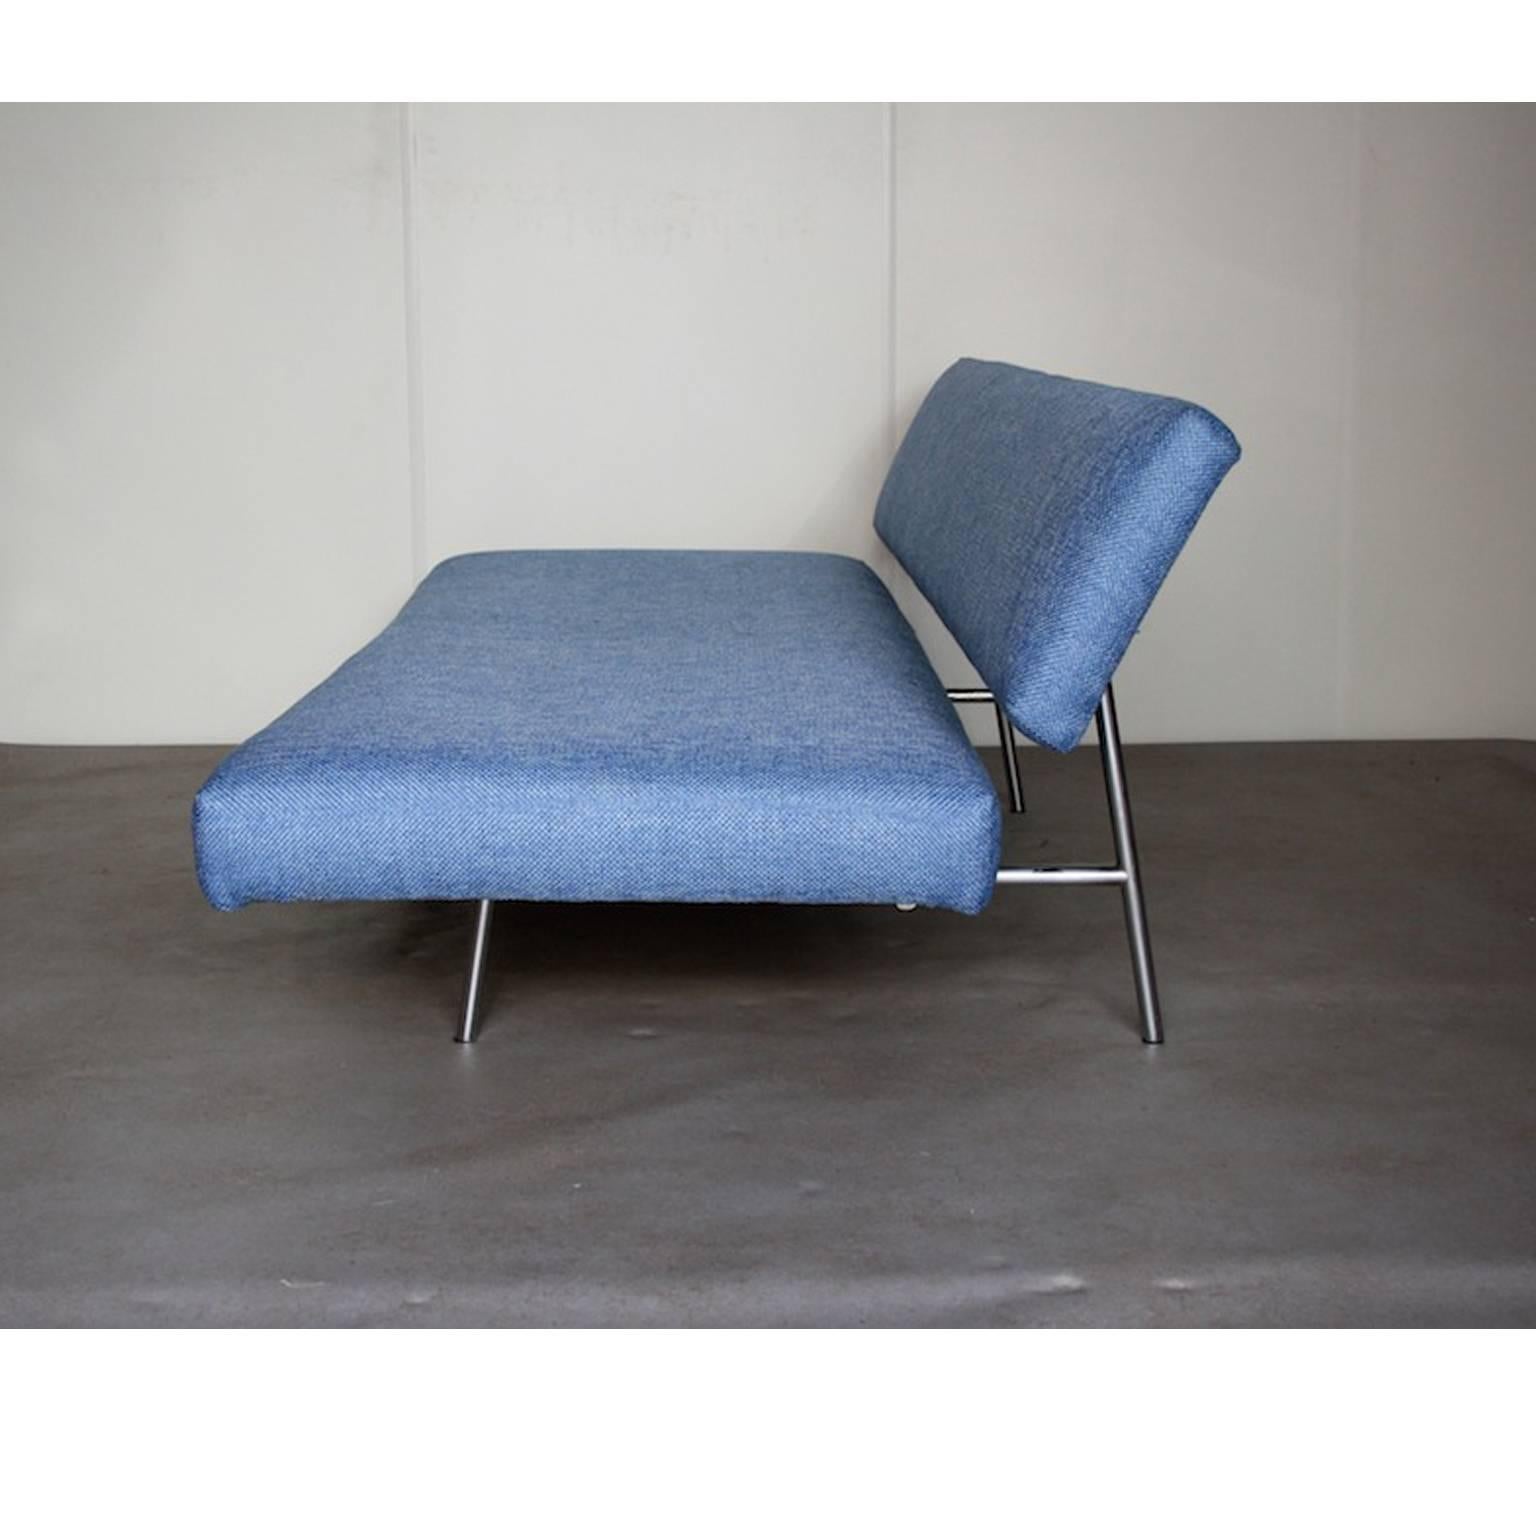 Mid-20th Century BR 02.7 Sleeper Sofa with Arm Rests by Martin Visser for 't Spectrum, Dutch For Sale